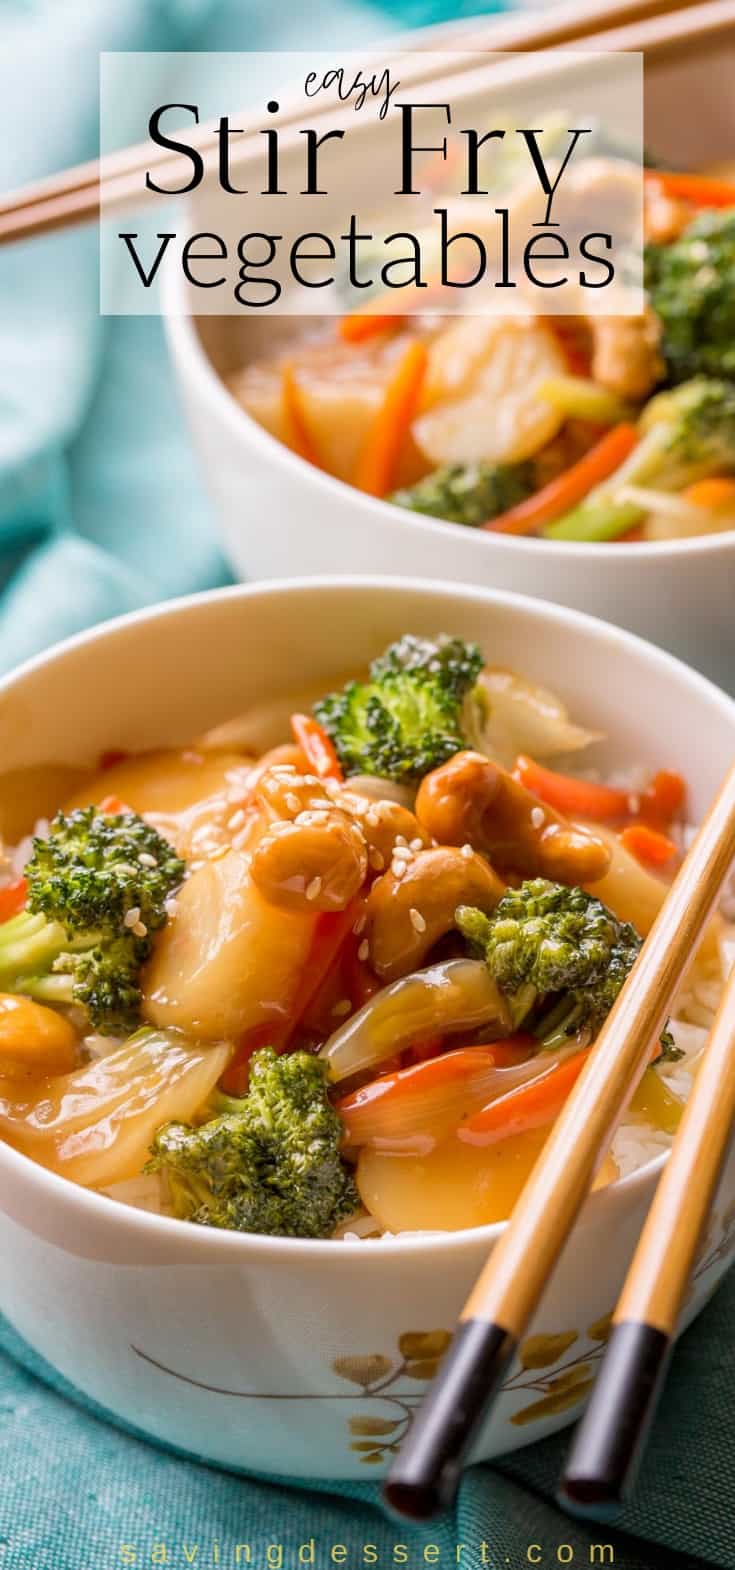 Closeup of a bowl of stir fry vegetables with broccoli and cashews served over rice